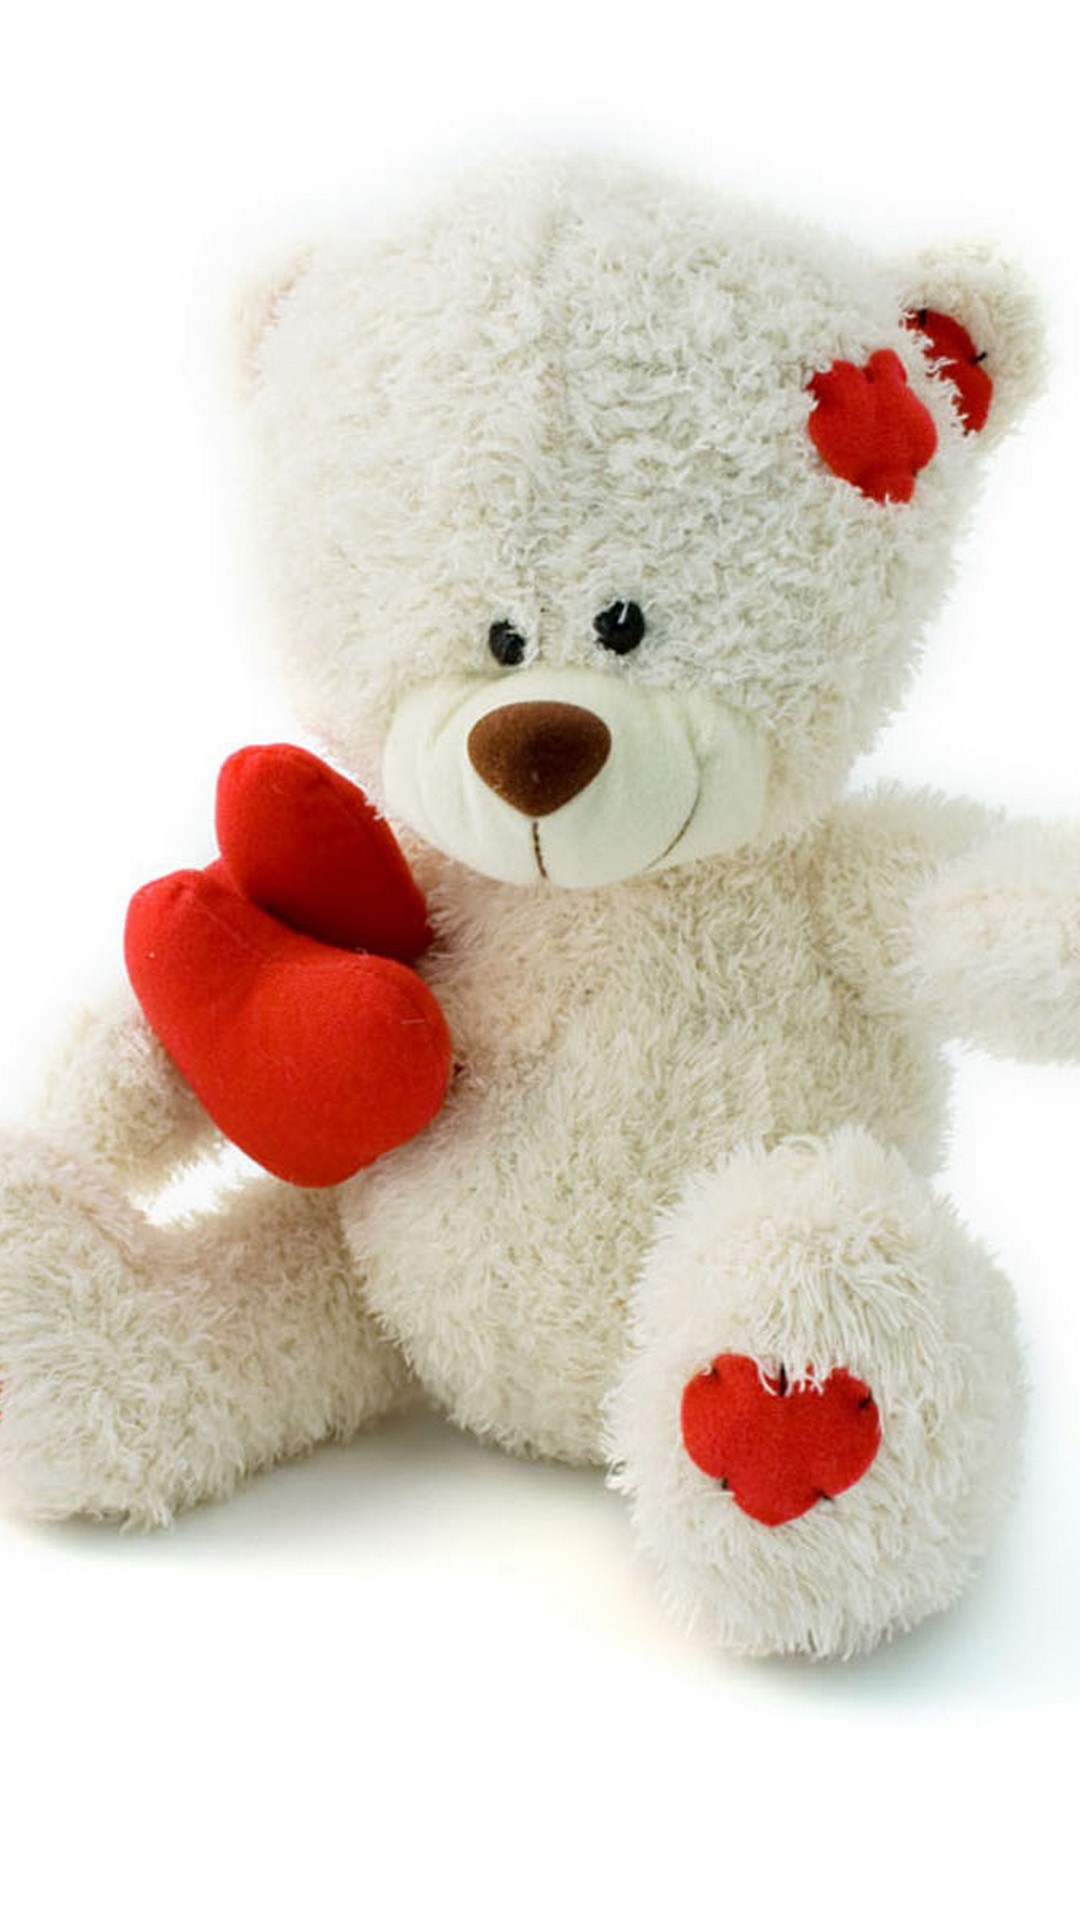 Big Teddy Bear Wallpaper Android With Image Resolution - Happy Teddy Bear Day Love , HD Wallpaper & Backgrounds